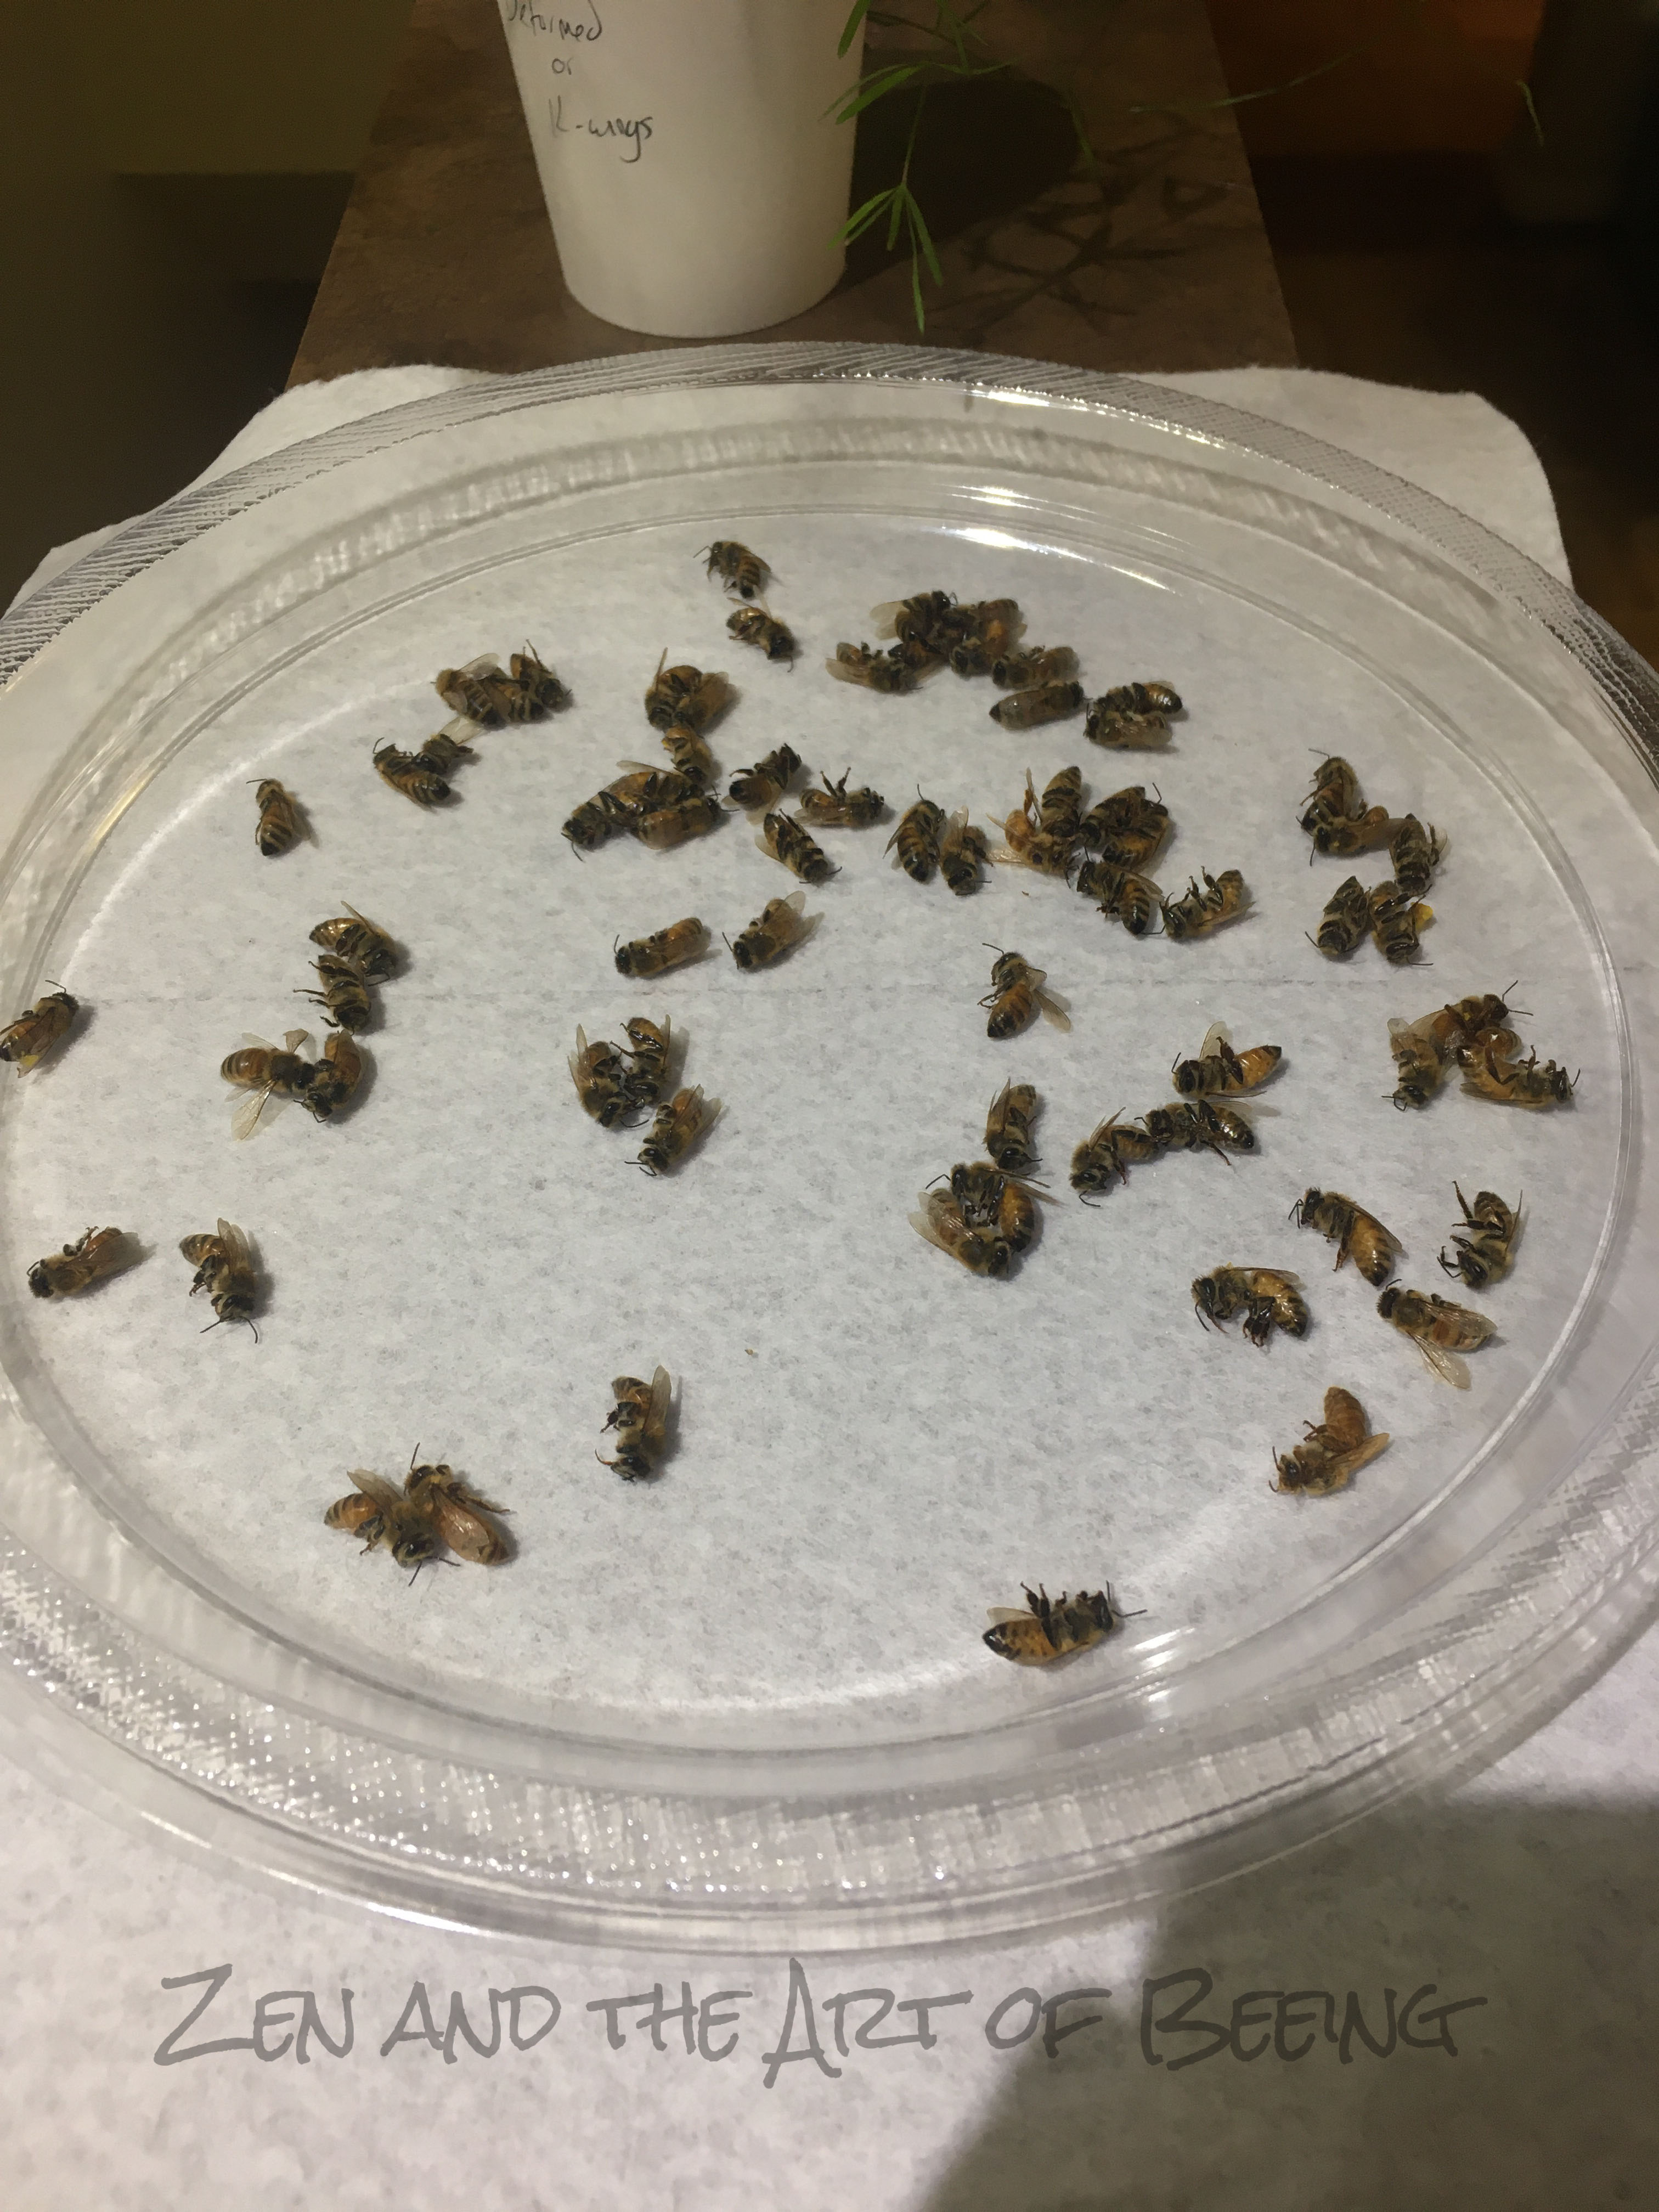 Bees that appear dead are spread out on a clear plastic plate.